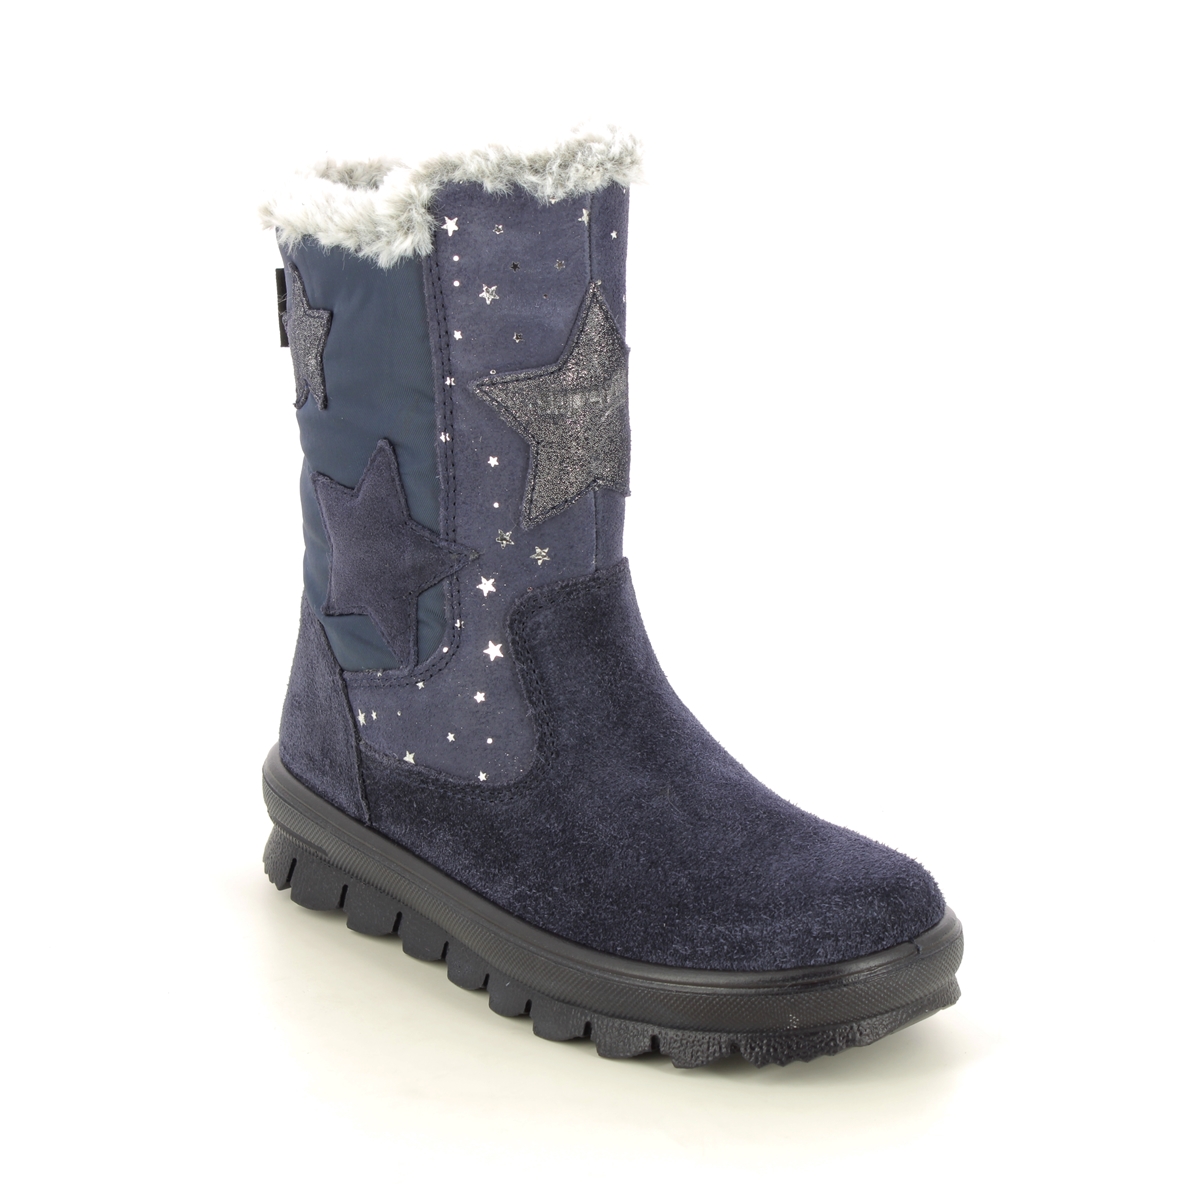 Superfit Flavia Star Gtx Navy Suede Kids Girls Boots 1000219-8000 In Size 27 In Plain Navy Suede For kids